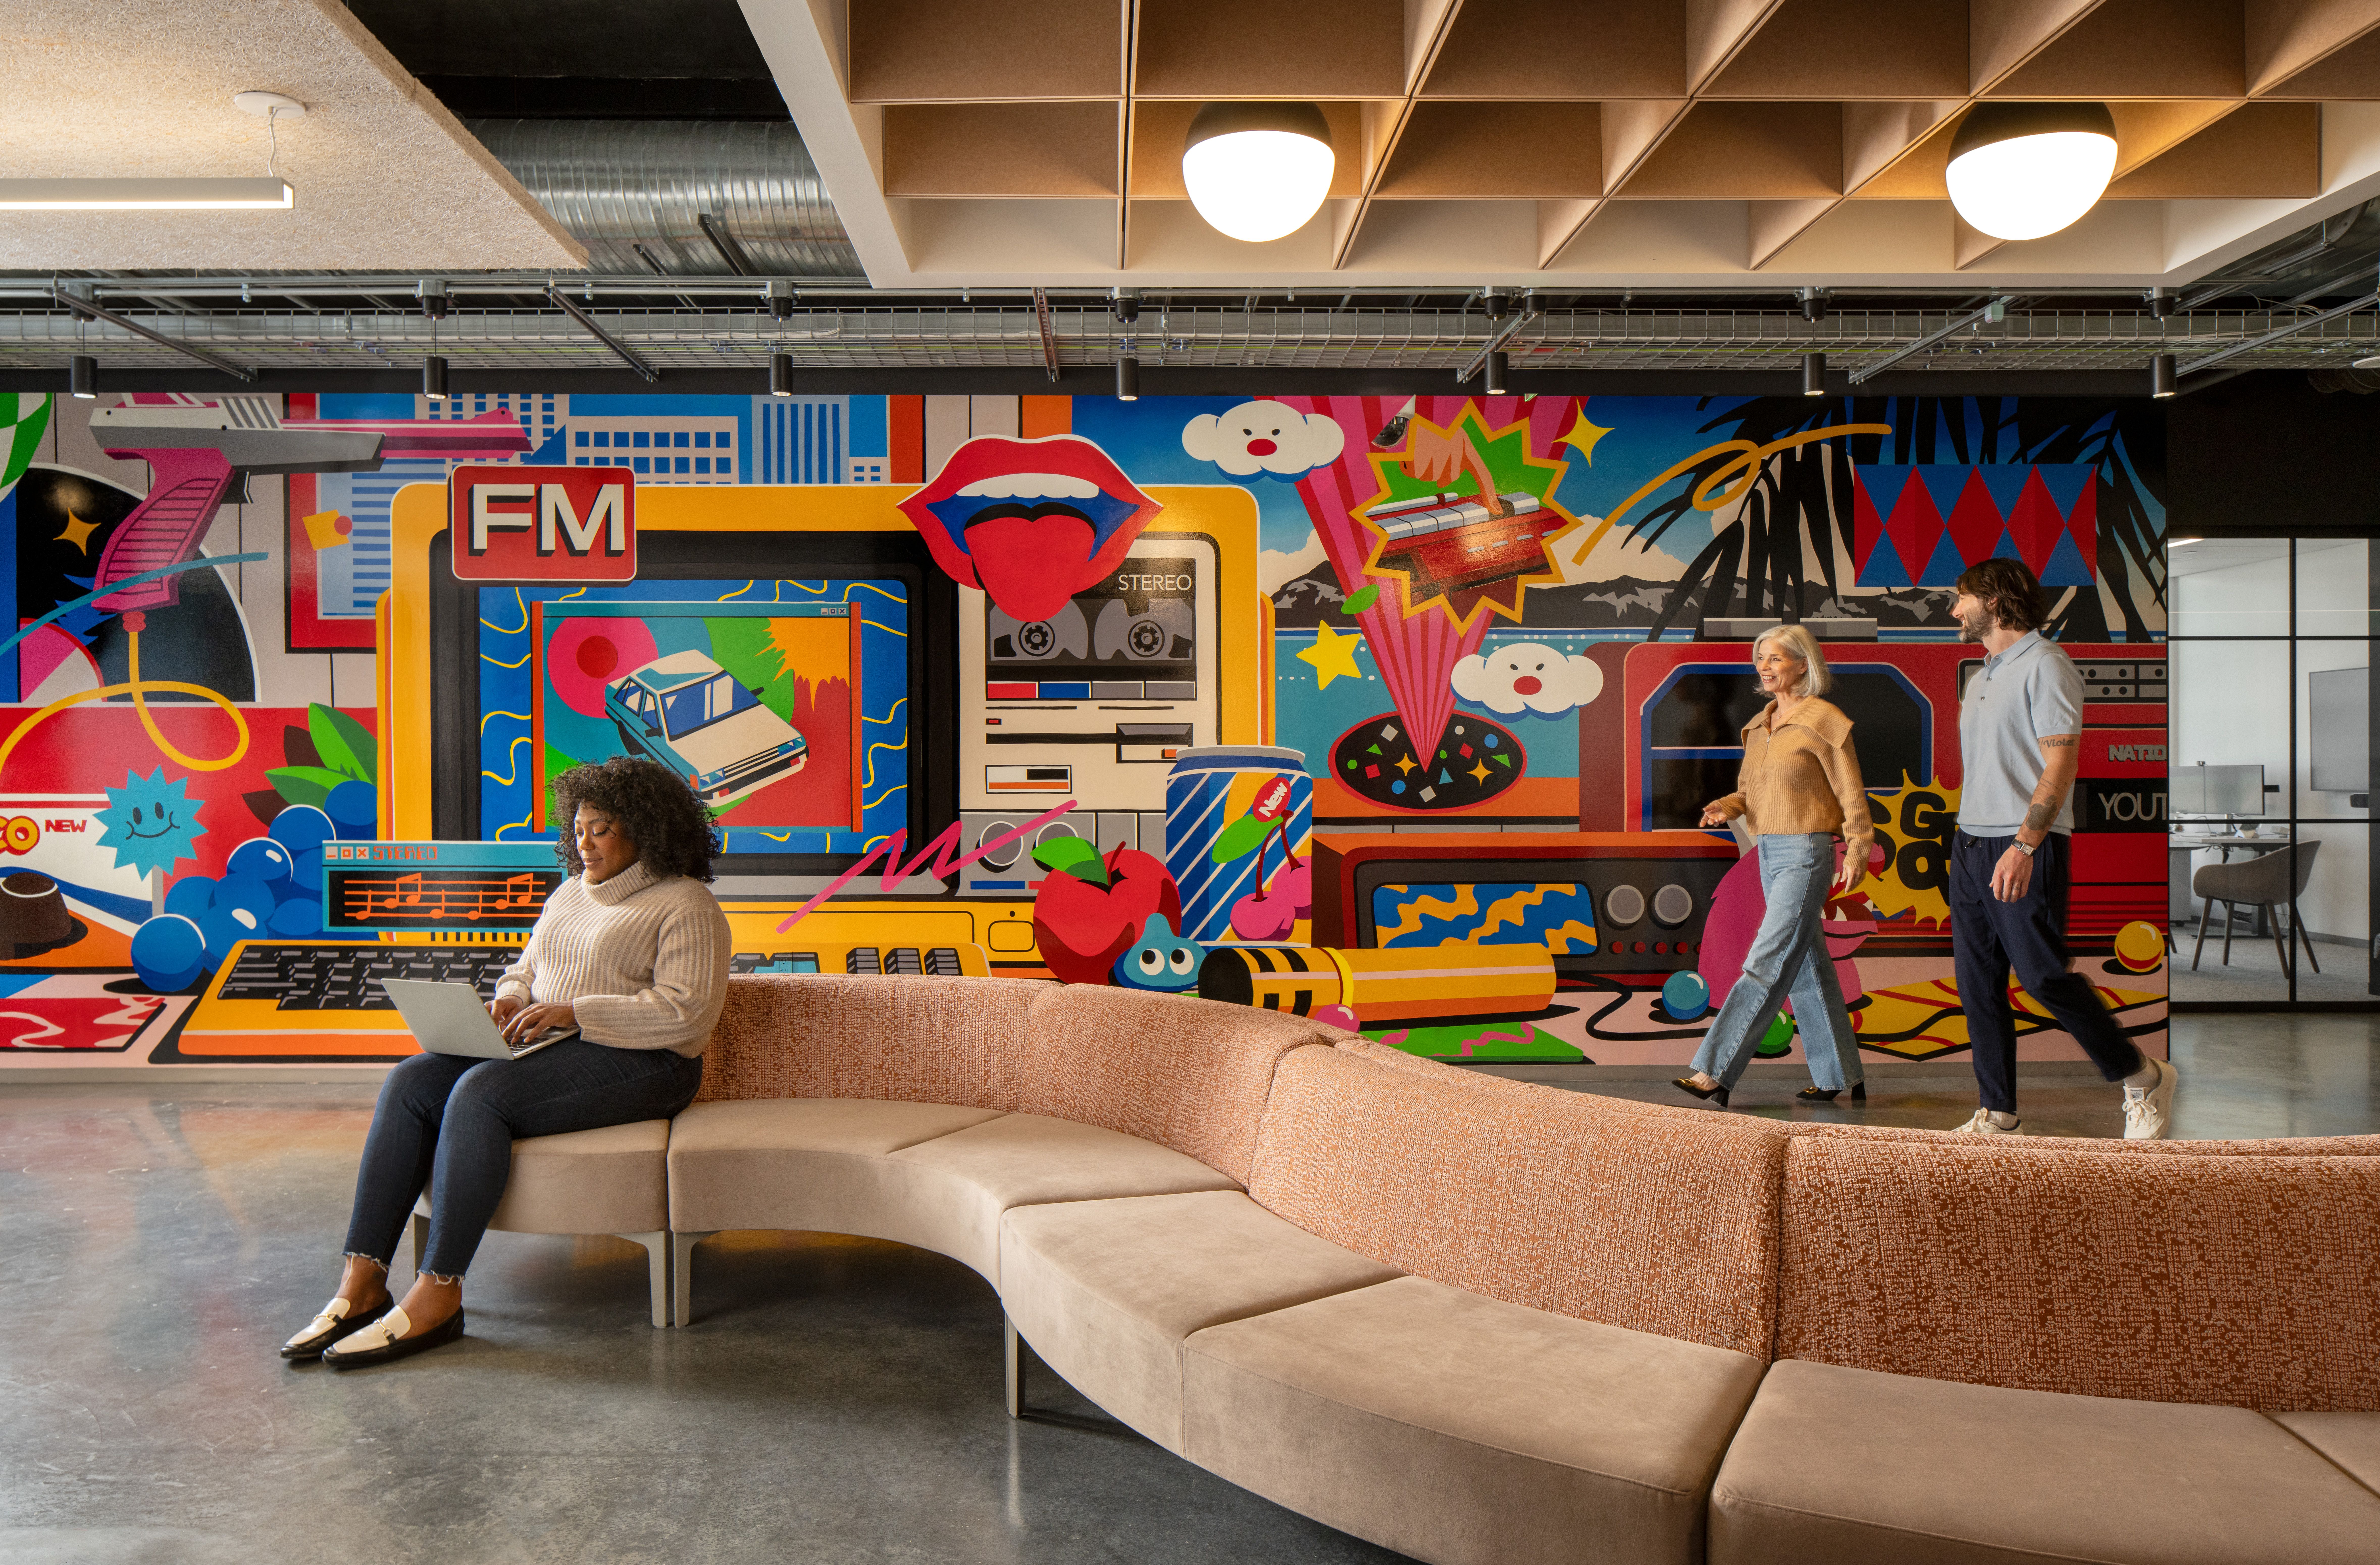 An employee types on a laptop while seating on a curved couch in front of a colorful mural 